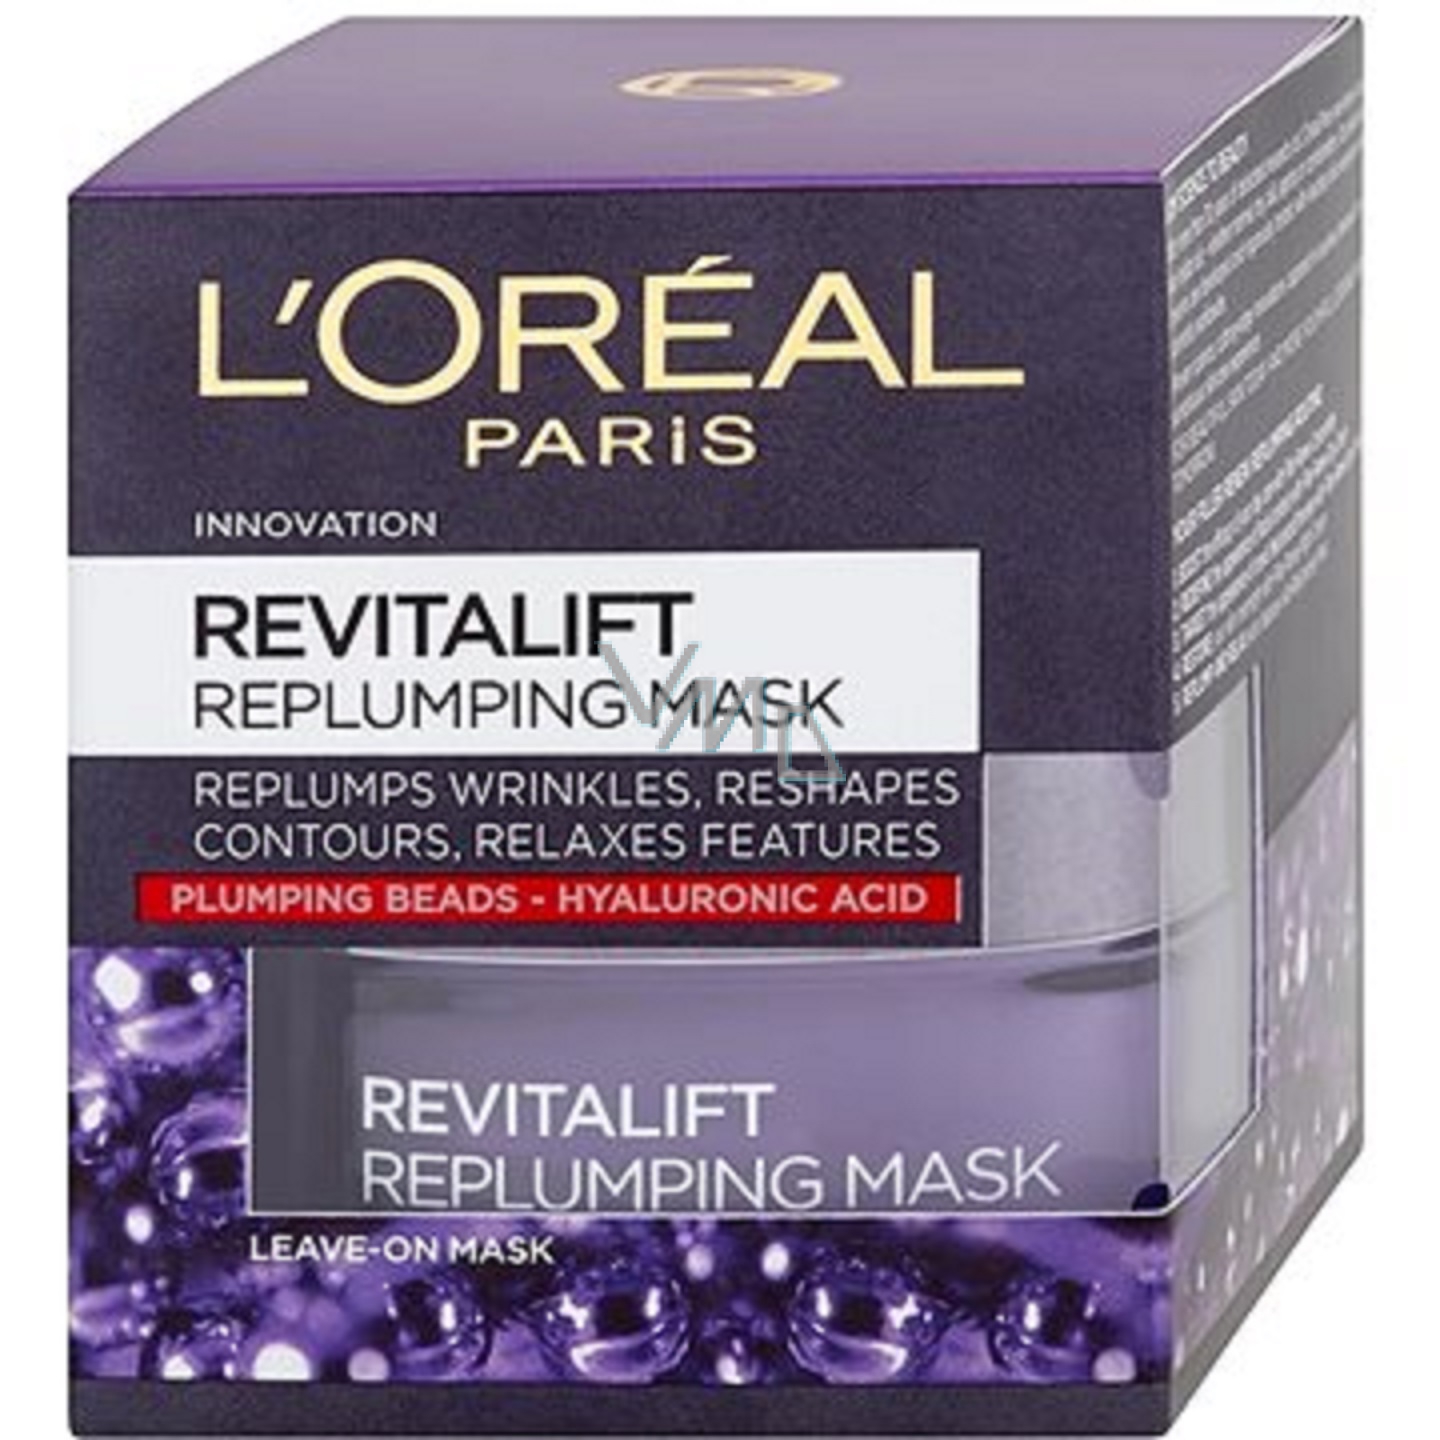 Loreal Paris Revitalift Replumping Mask face mask for all skin types 50